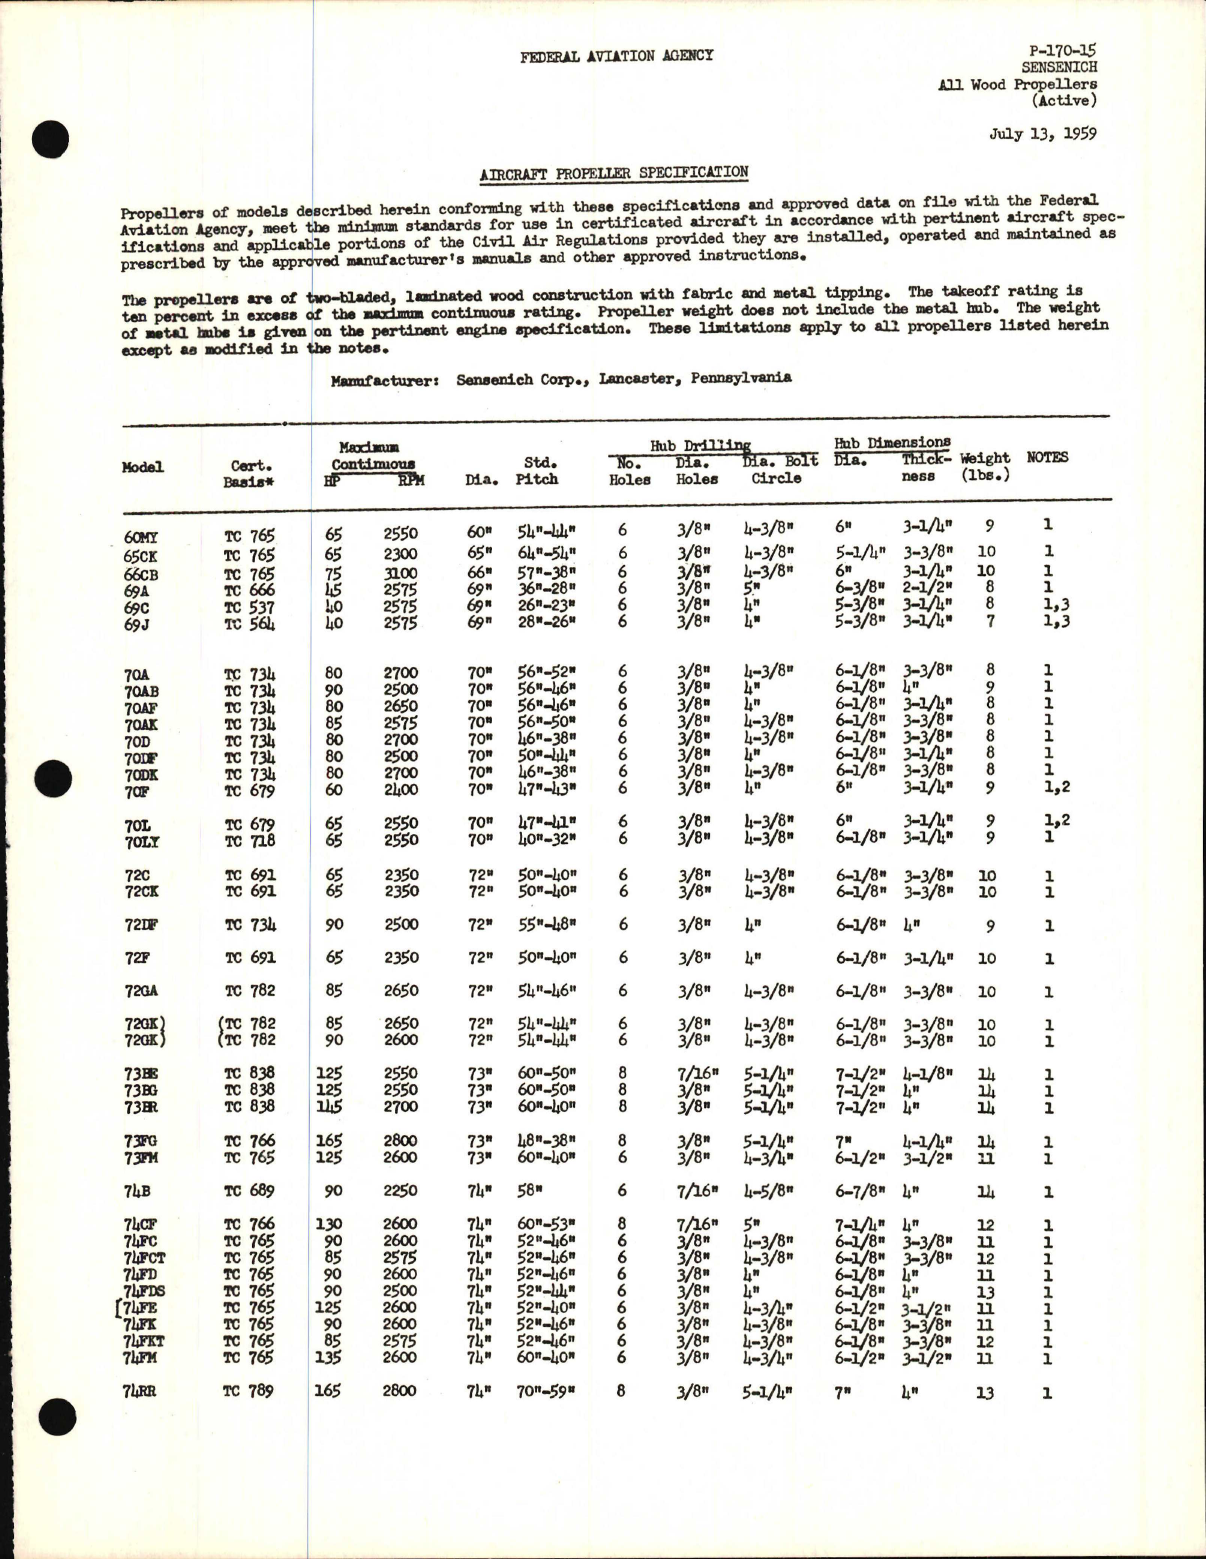 Sample page 1 from AirCorps Library document: All Wood Propellers